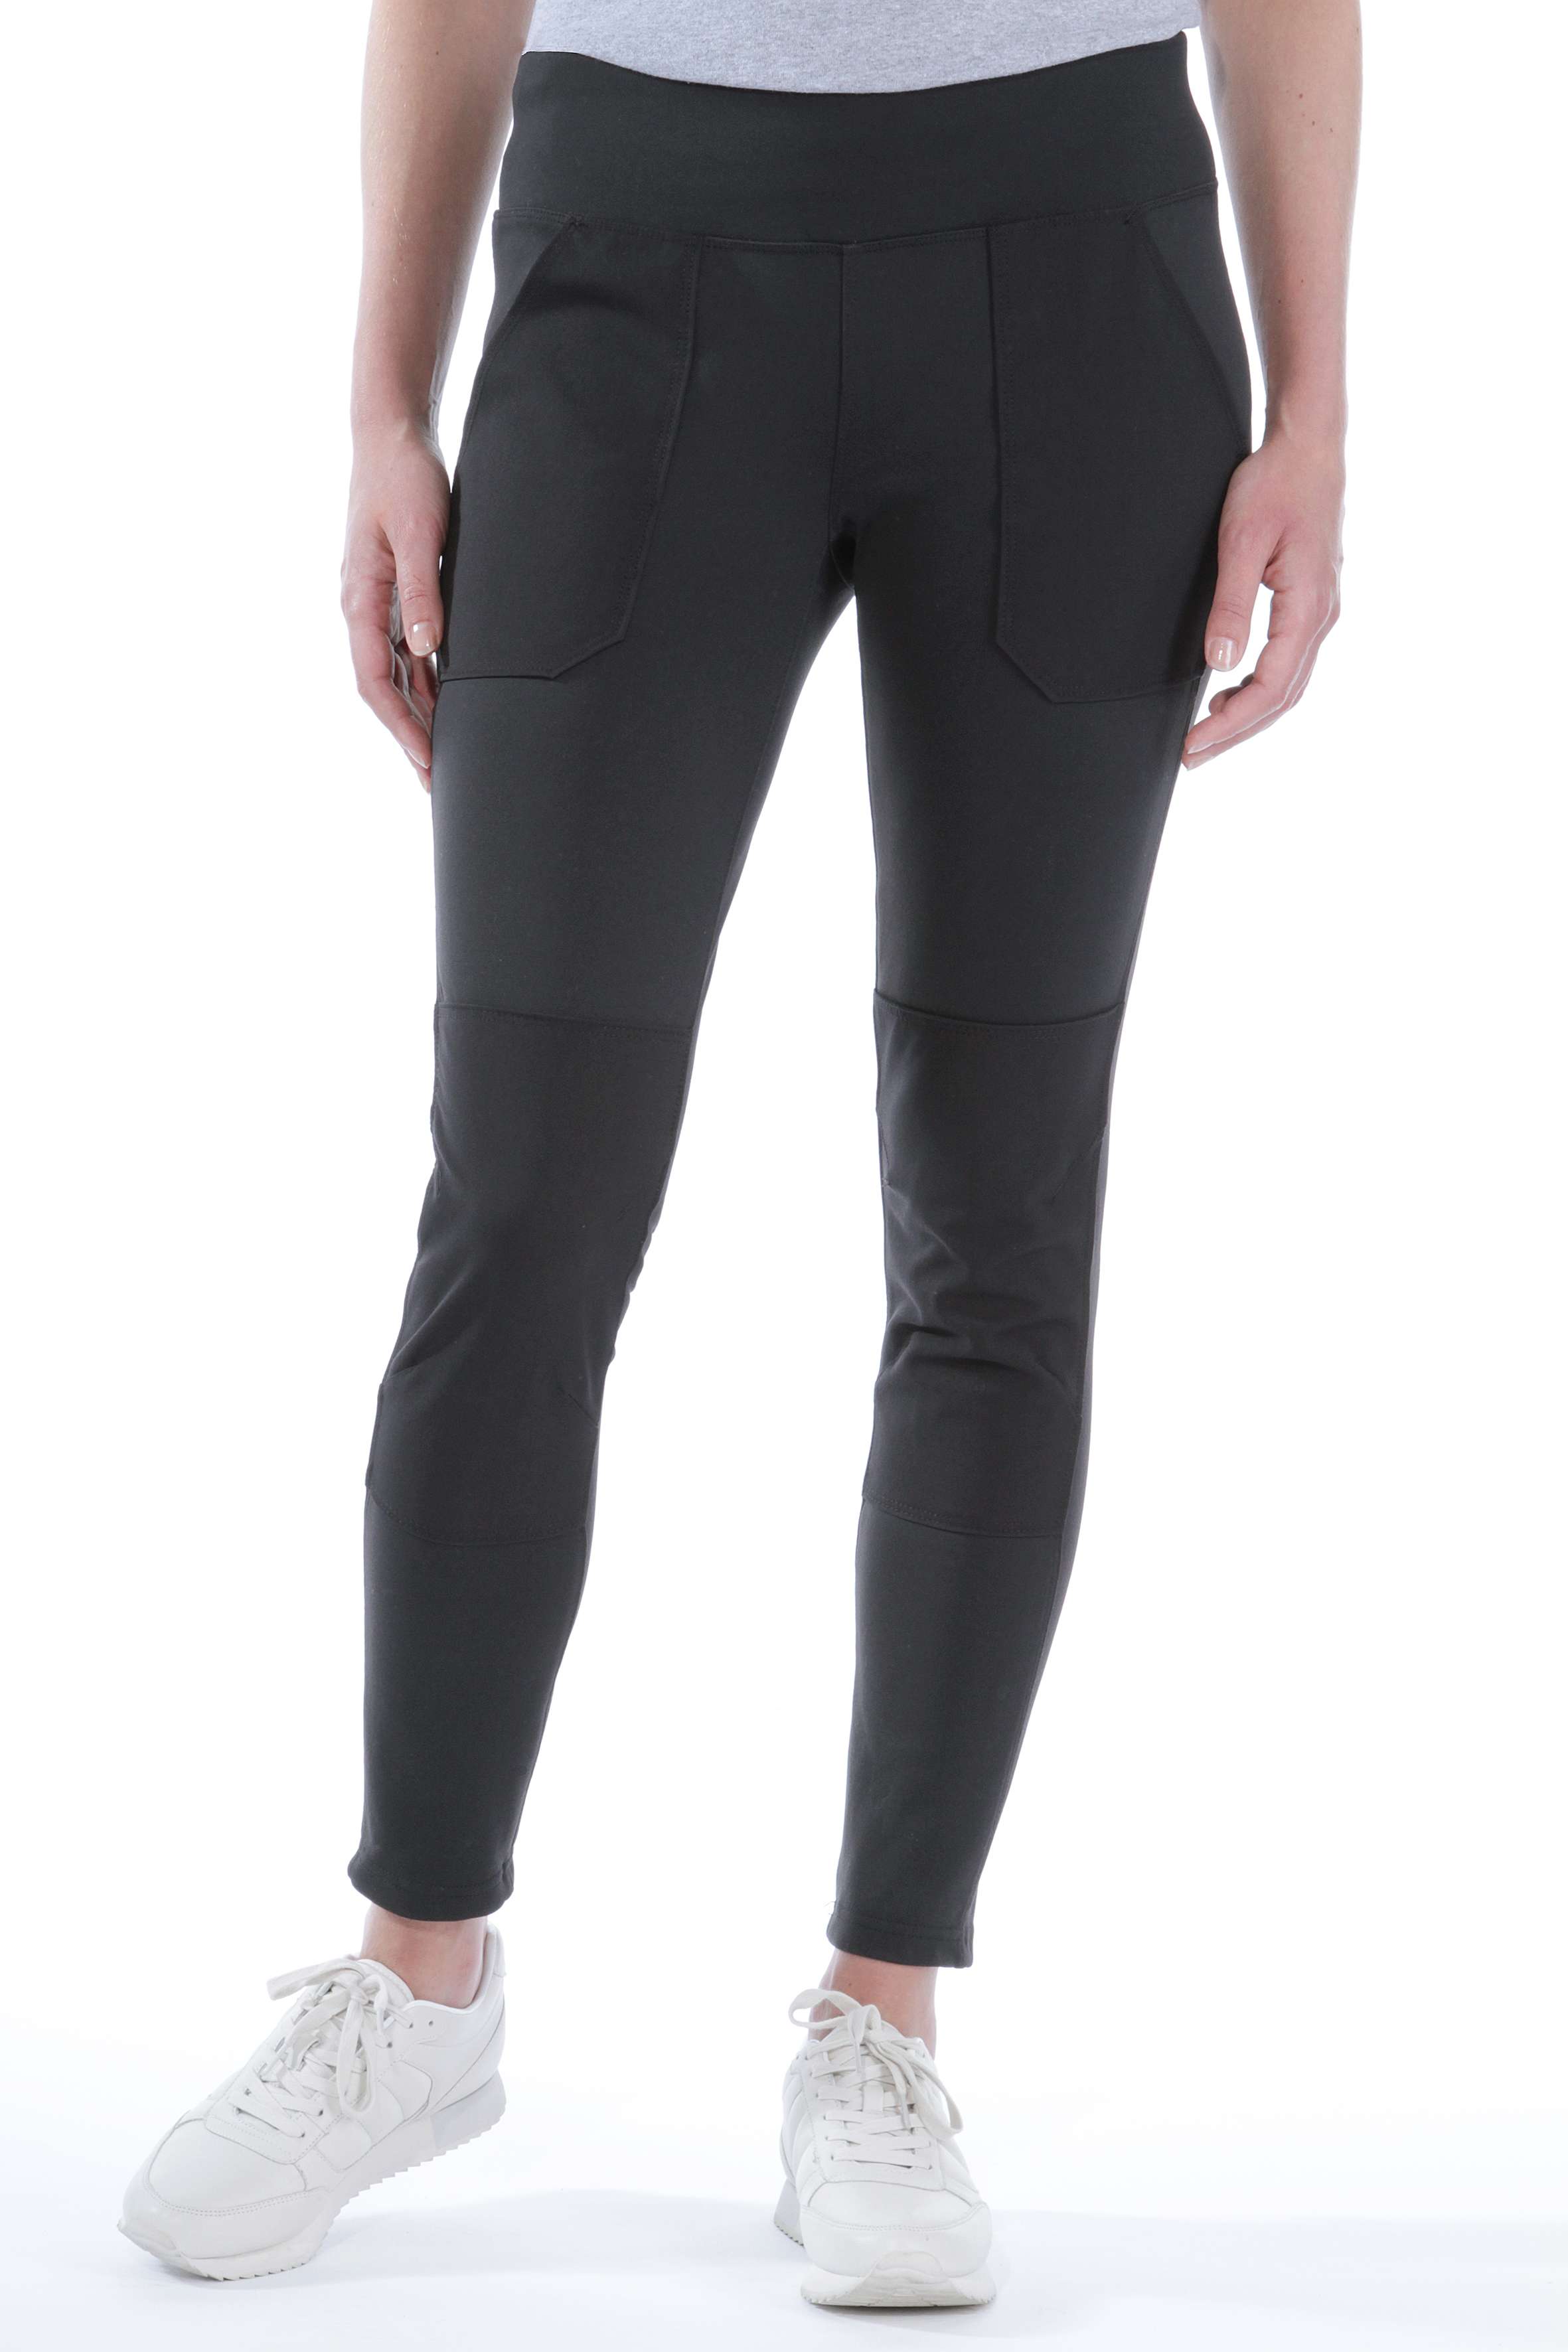 Carhartt Force Fitted Midweight Utility Leggings